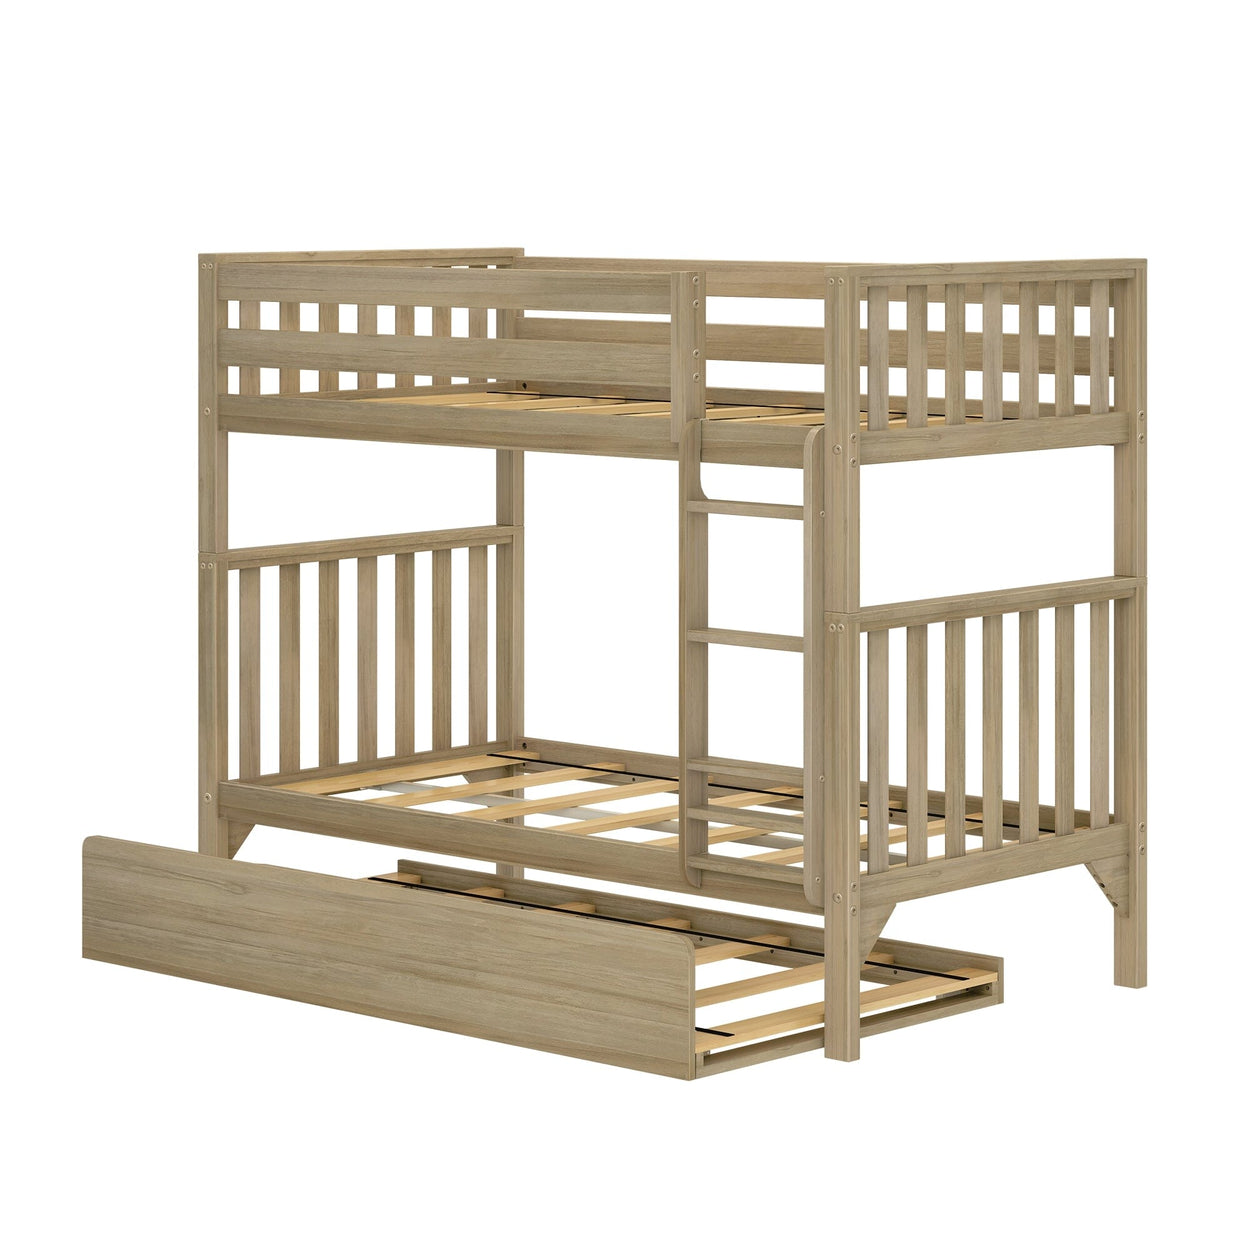 216201-010 : Bunk Beds Scandinavian Twin over Twin Bunk Bed with Twin-Size Trundle, Blonde